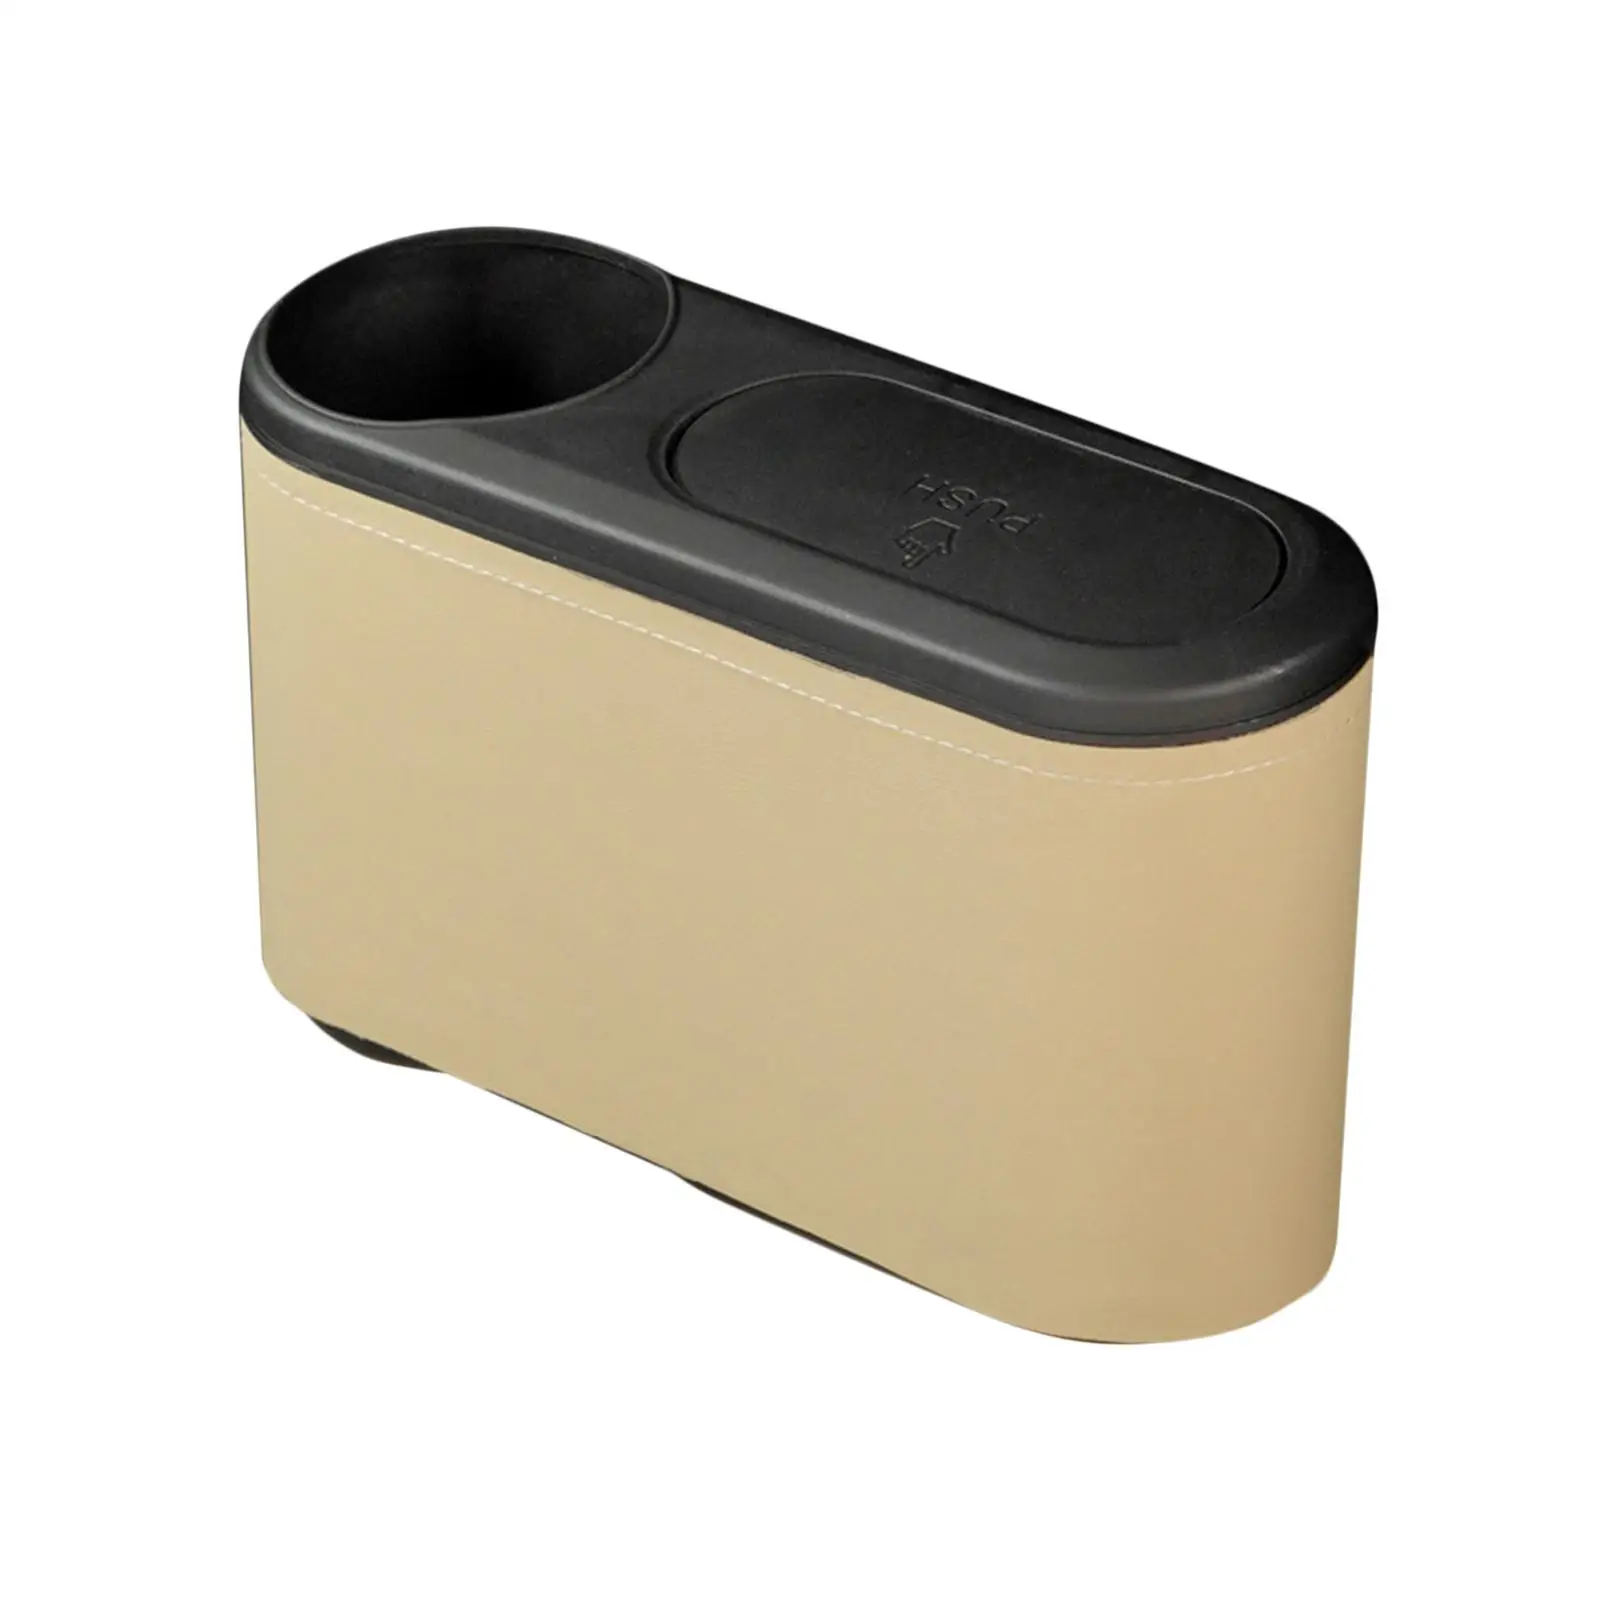 Vehicle Trash Bin Car Accessory for Interior with Lid Pressing Car Trash Can